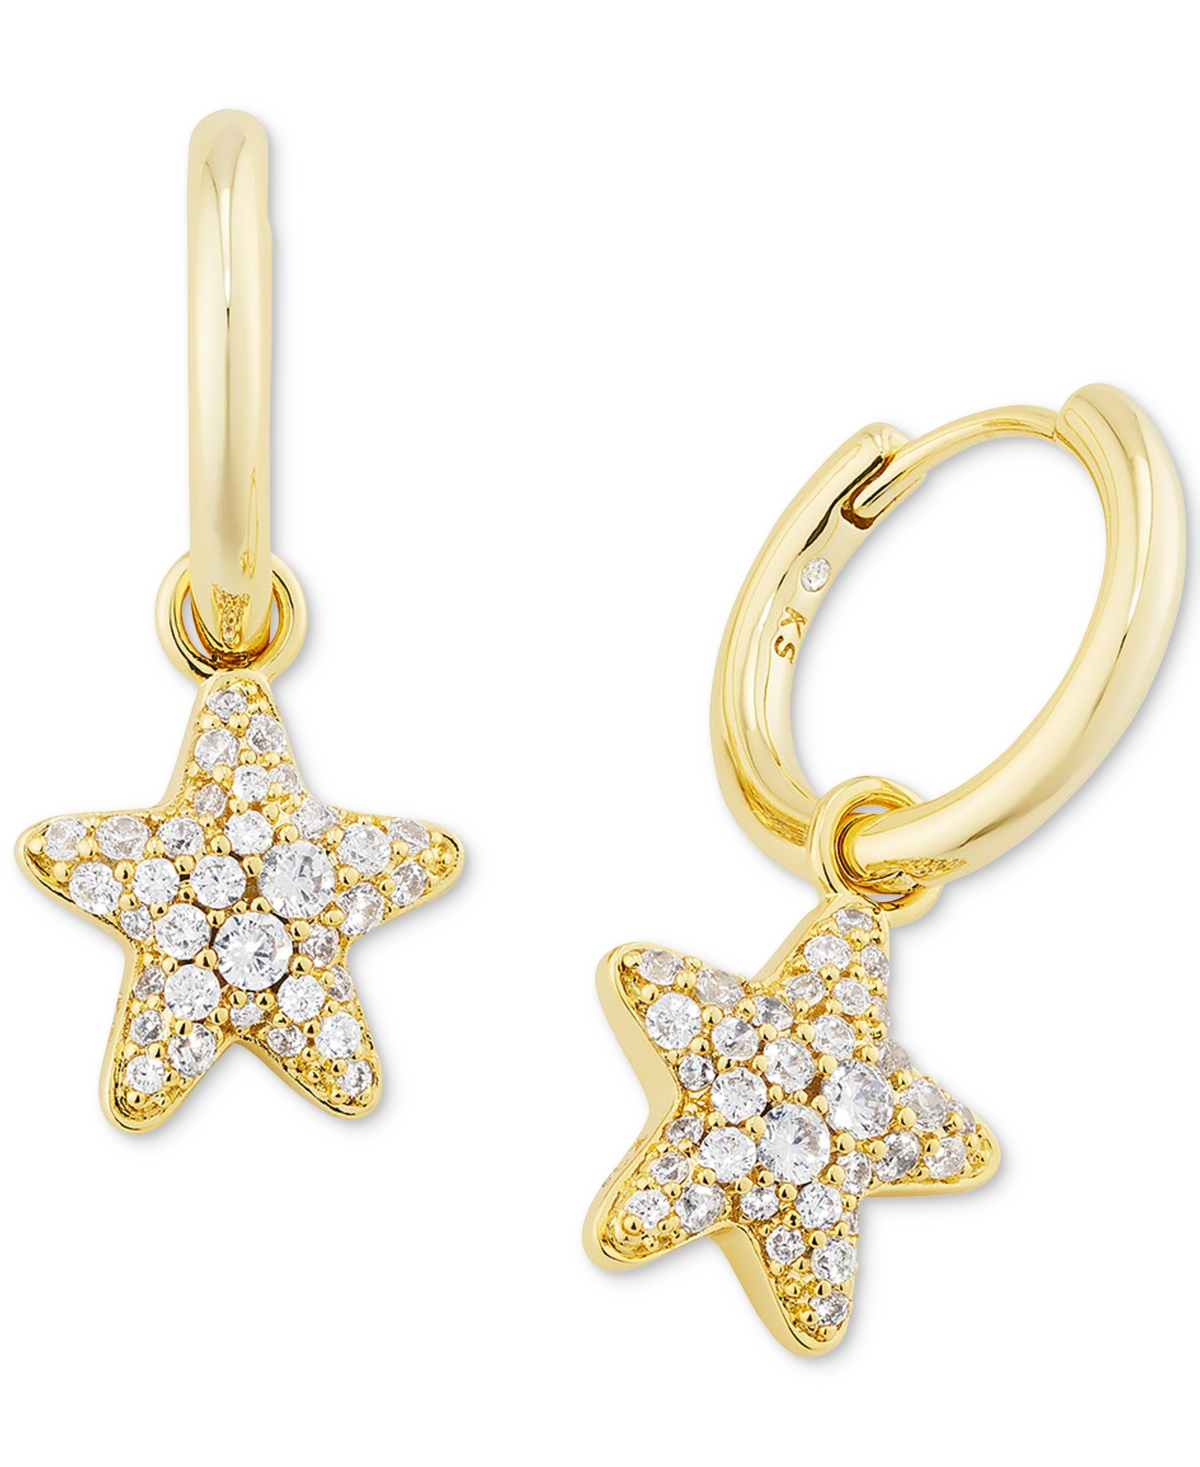 Pave Star Removable Charm Huggie Hoop Earrings - Gold White